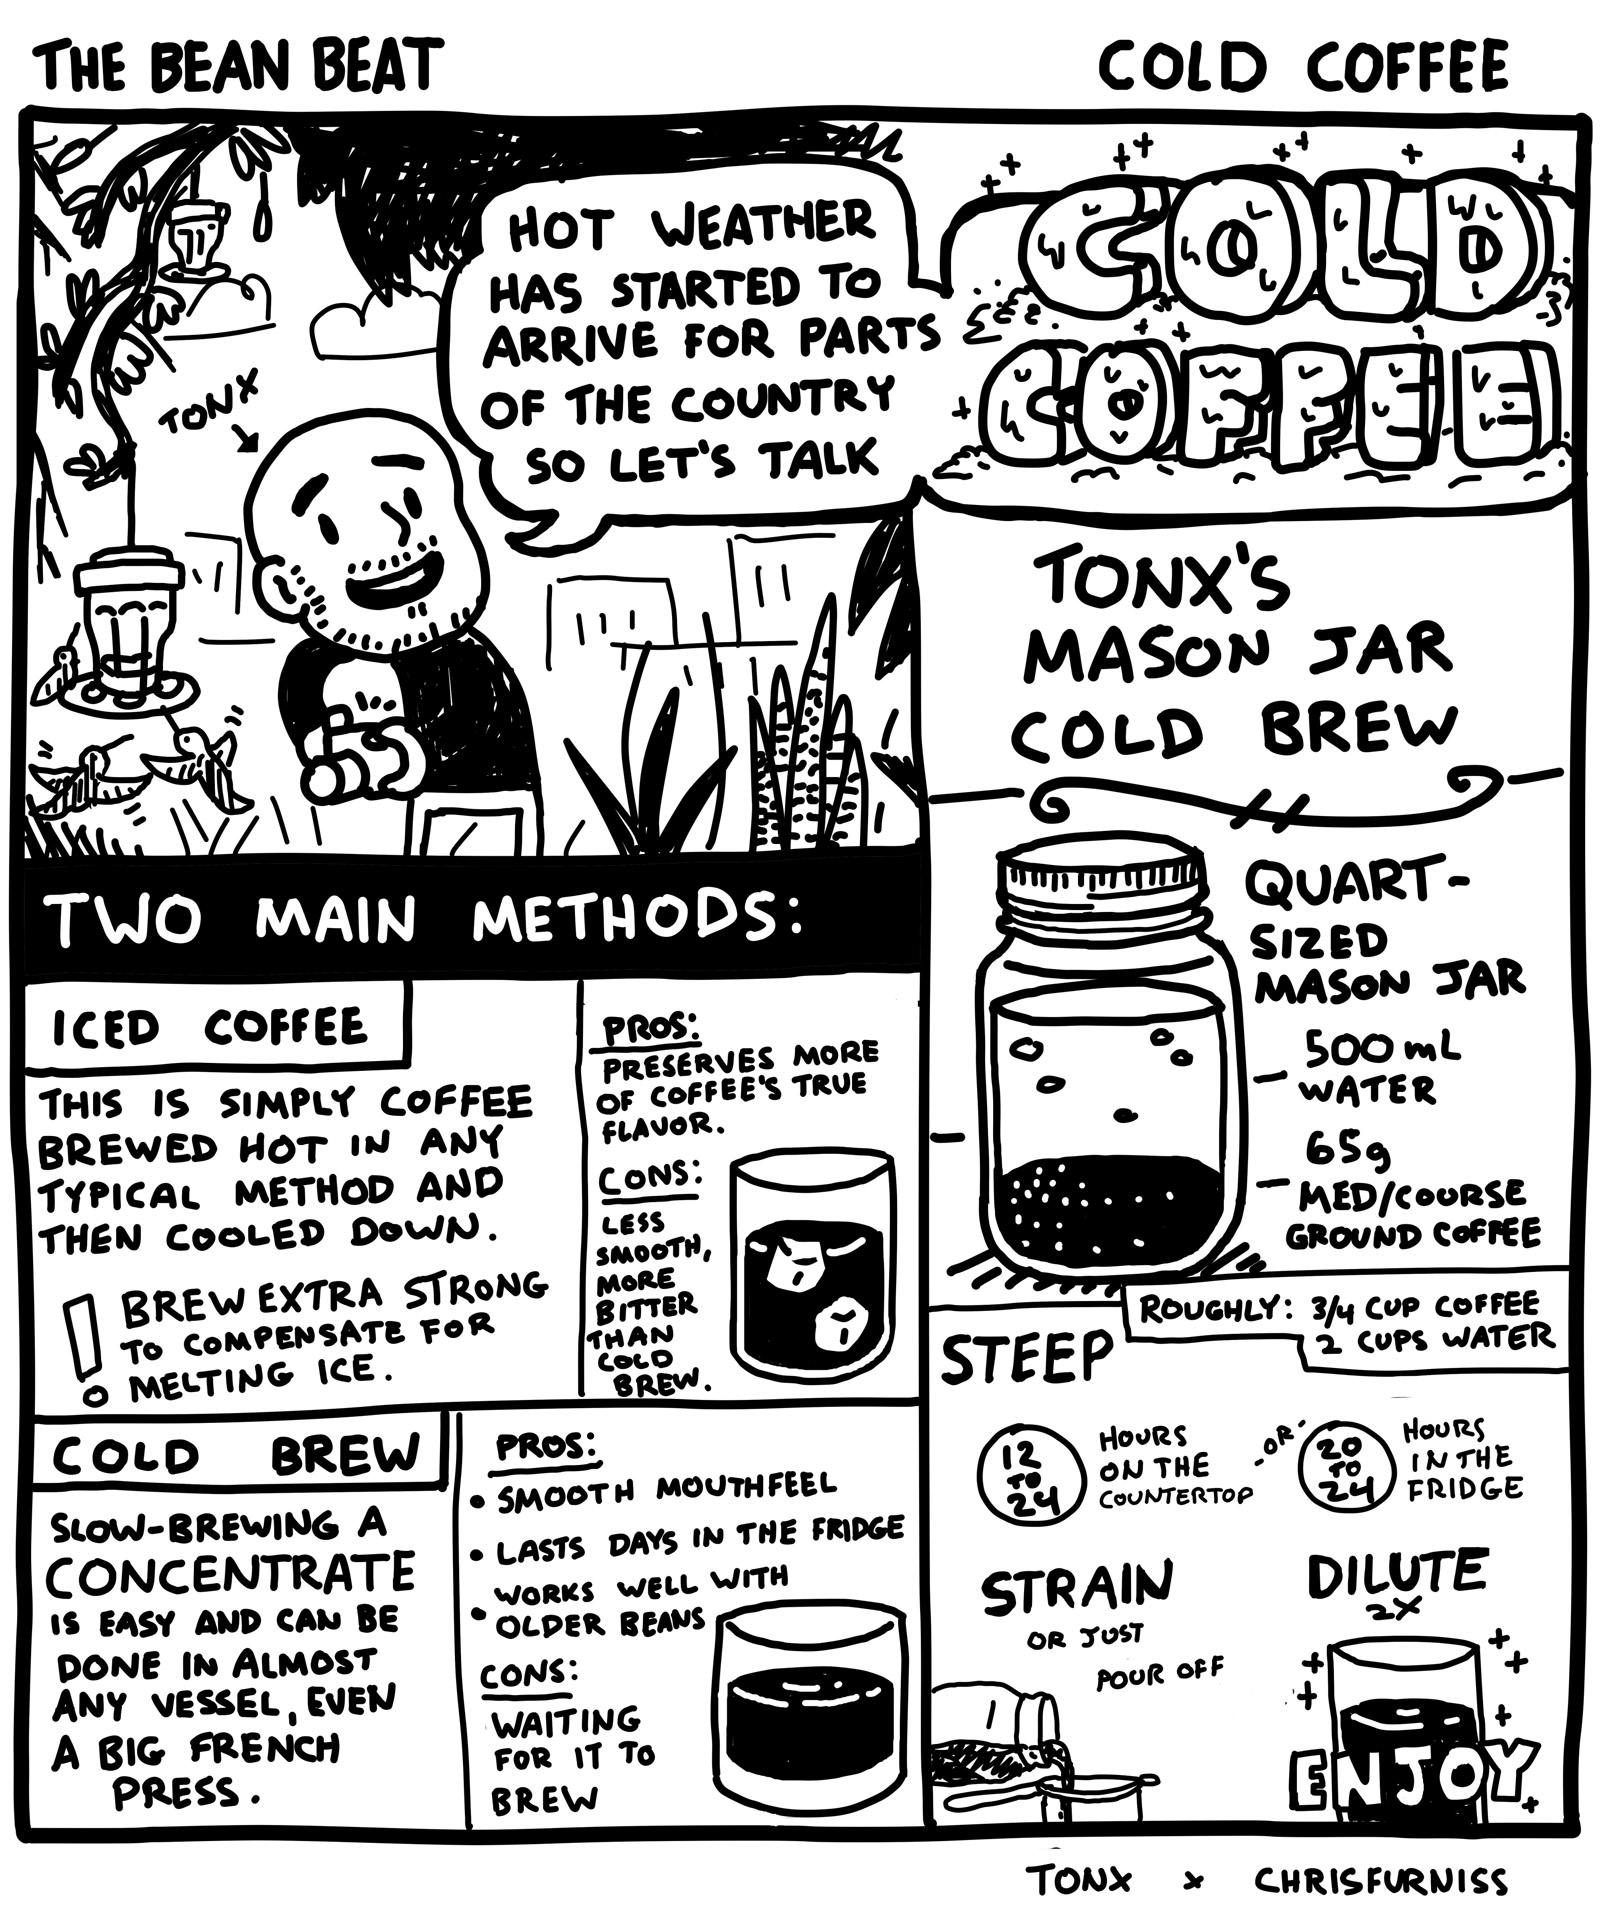 Bean Beat comic by Chris Furniss and Tonx with Cold Brew coffee recipes